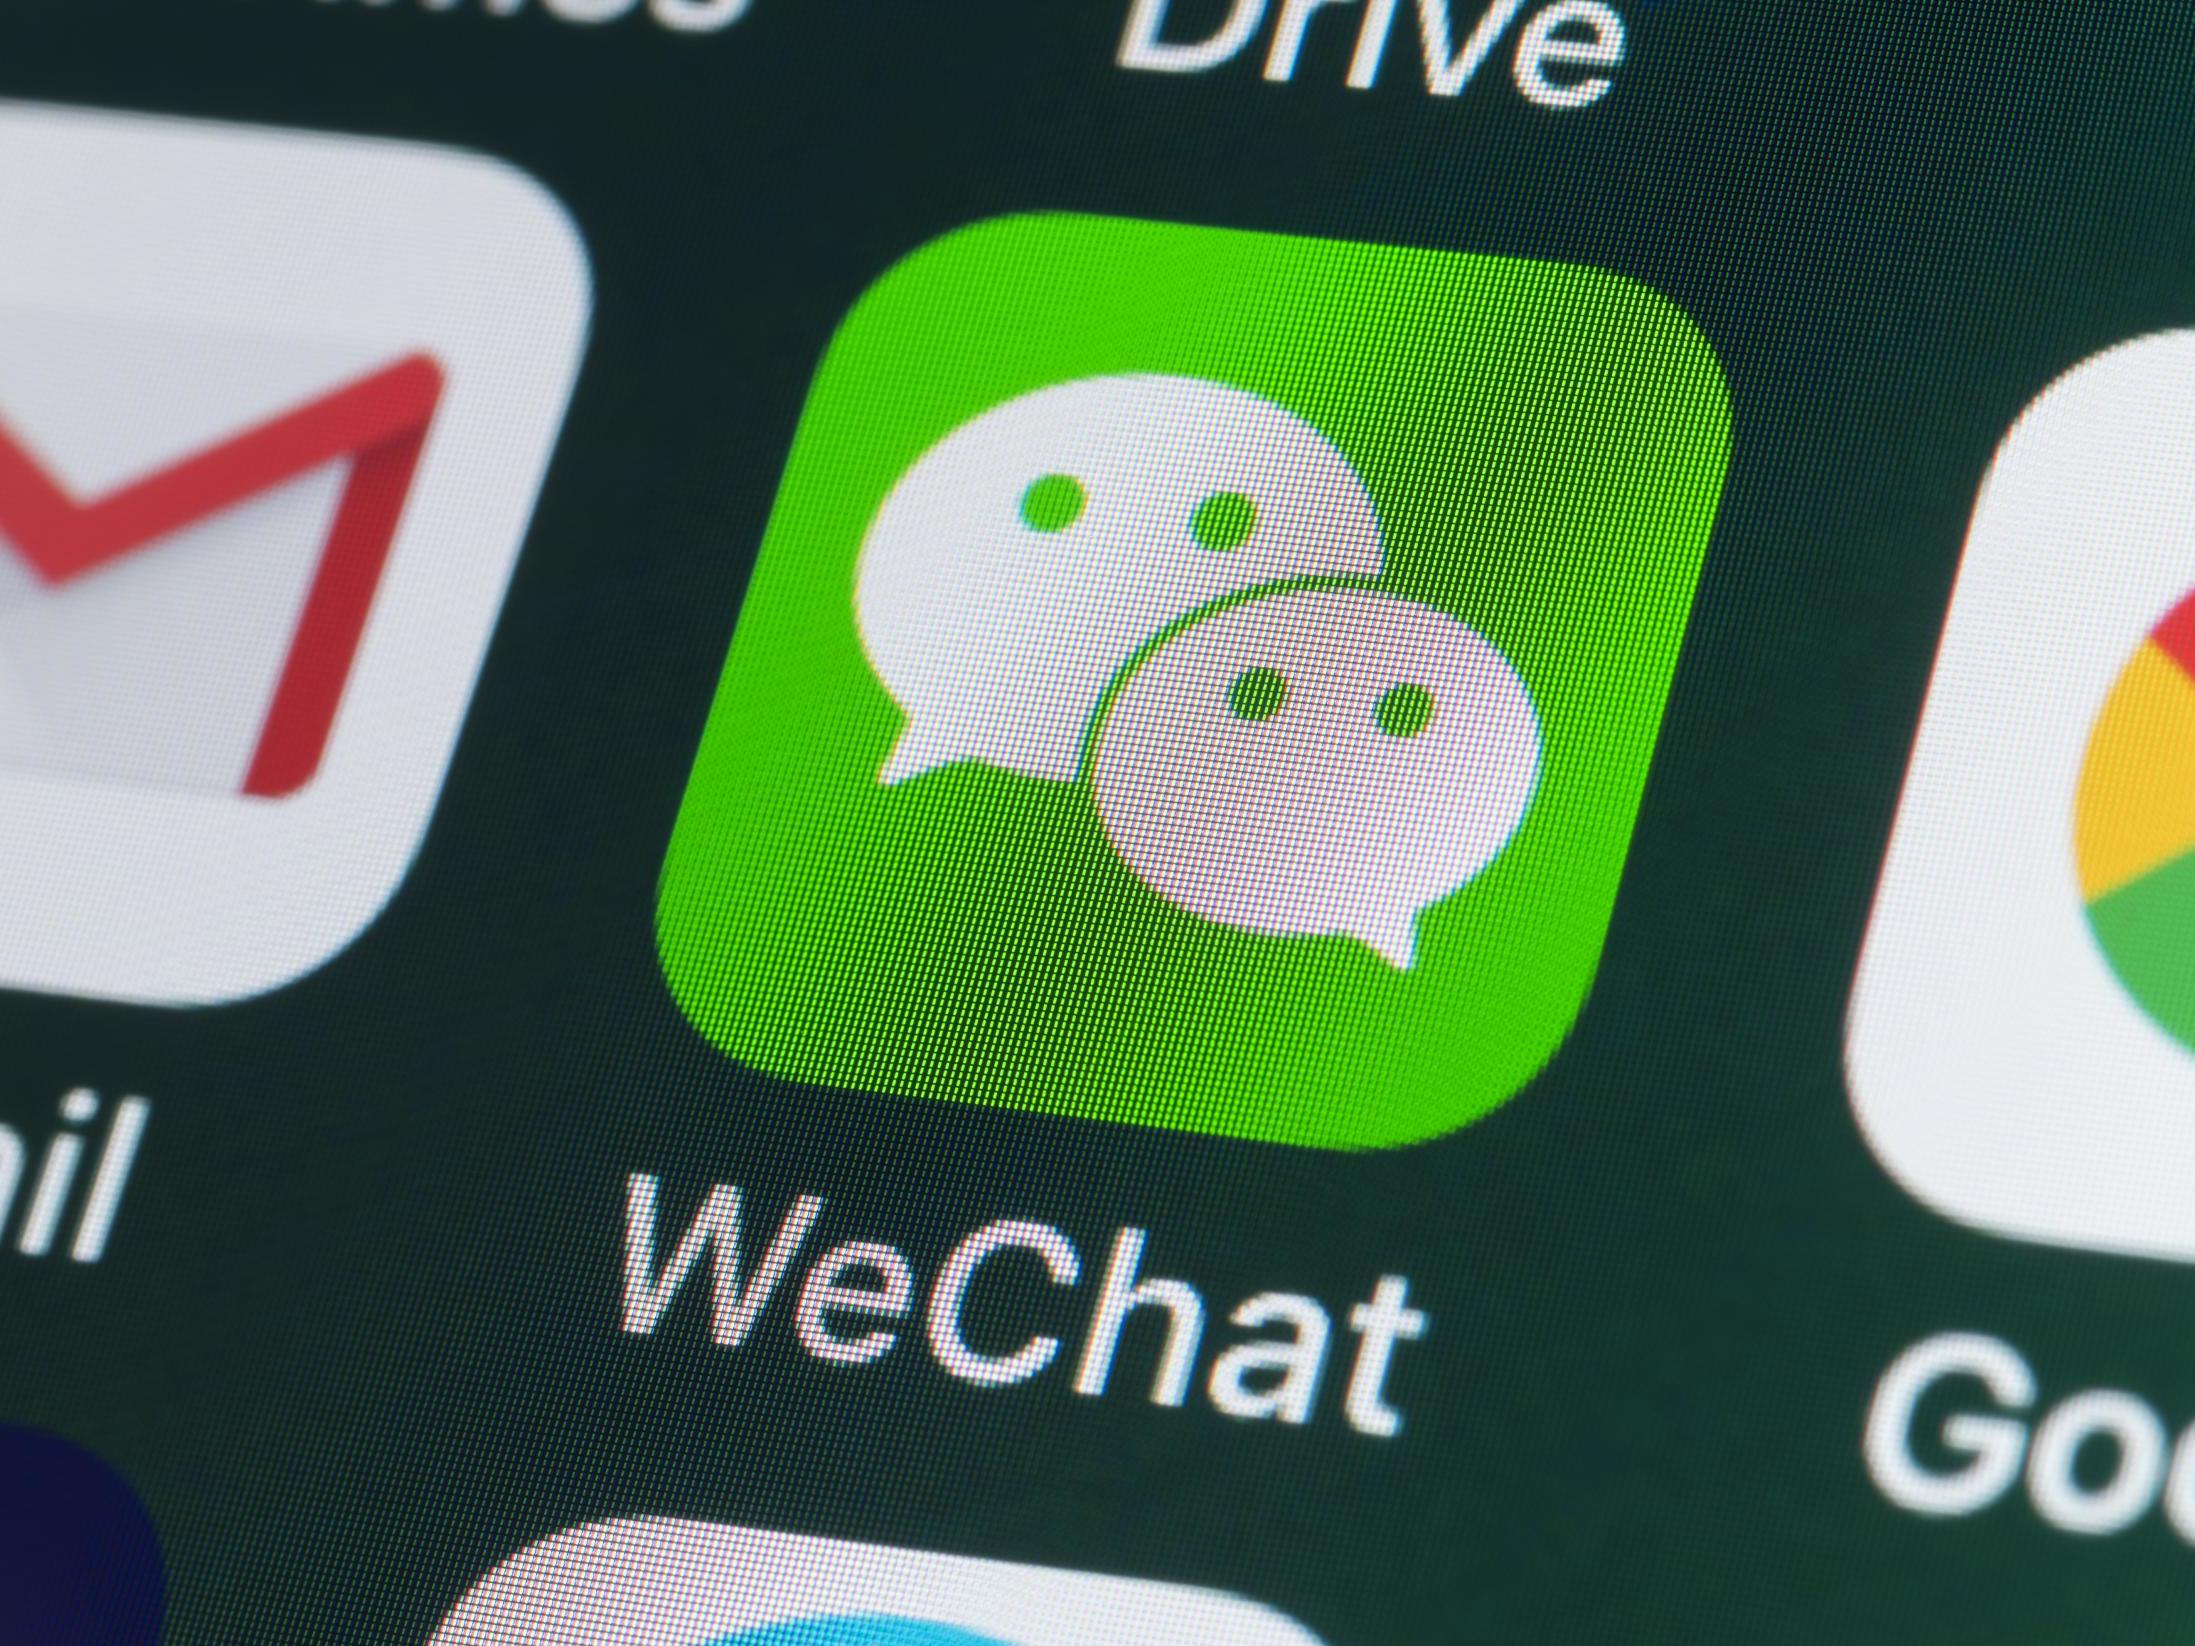 WeChat accounts expressing support for Liu Jingyao  have been disabled in recent days